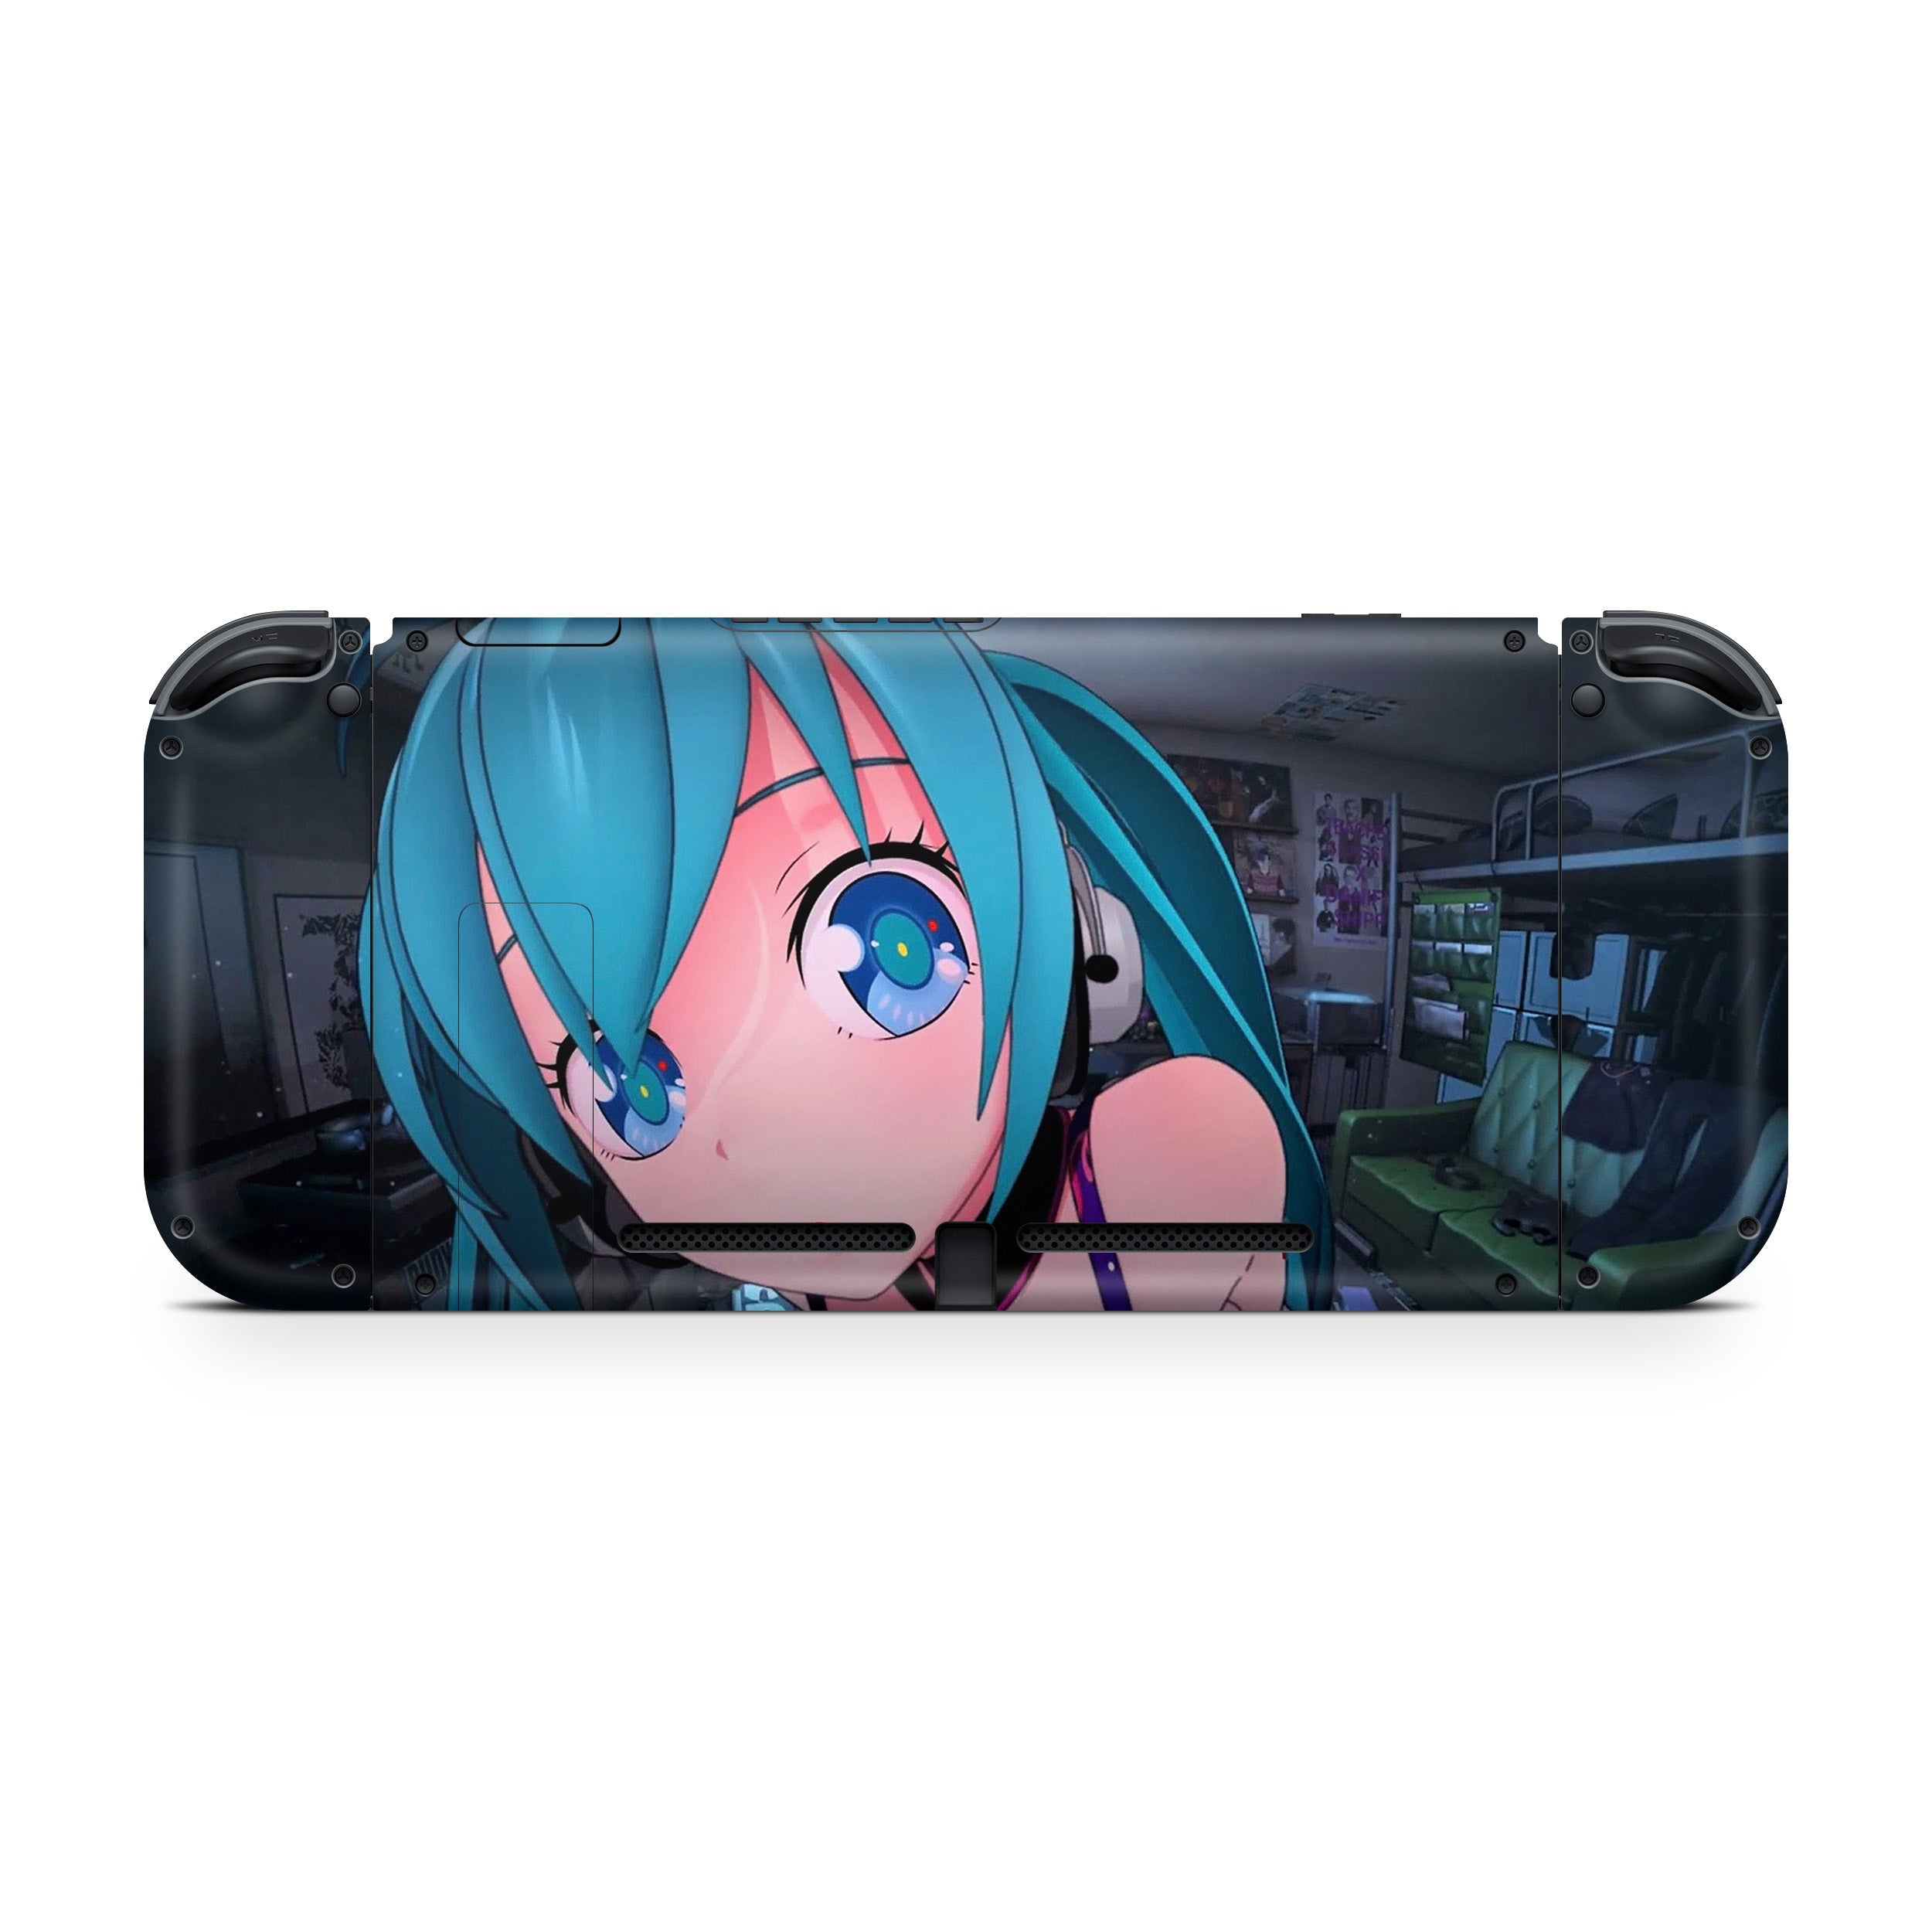 A video game skin featuring a Anime Blue Haired Girl design for the Nintendo Switch.